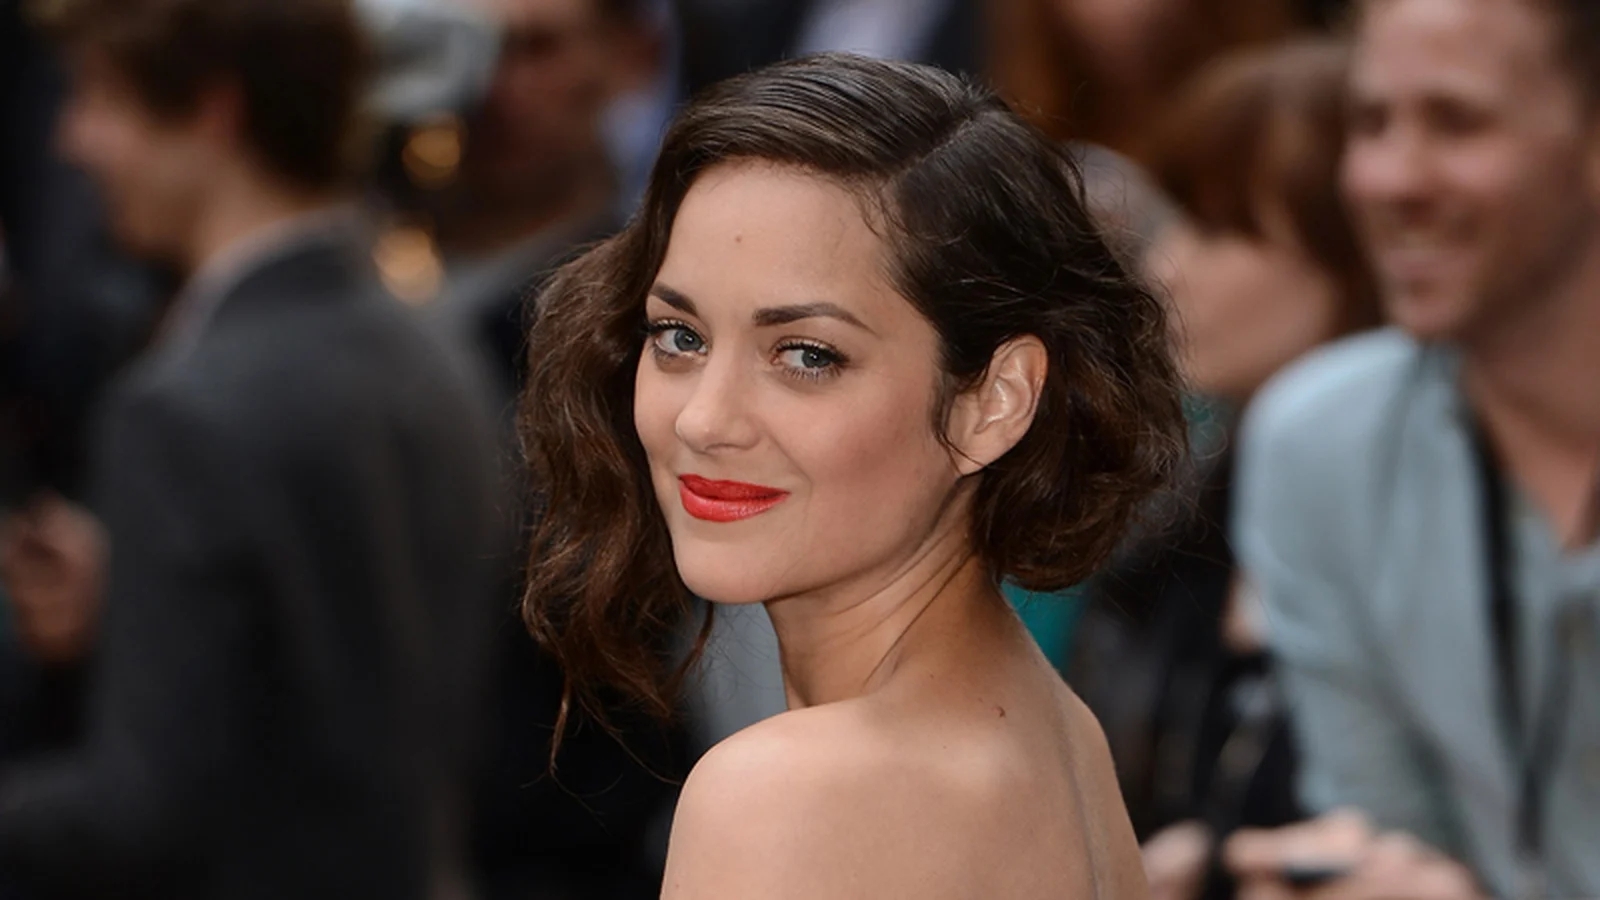 Marion Cotillard: 'A director manipulated me and made me feel like an object, I hated it'